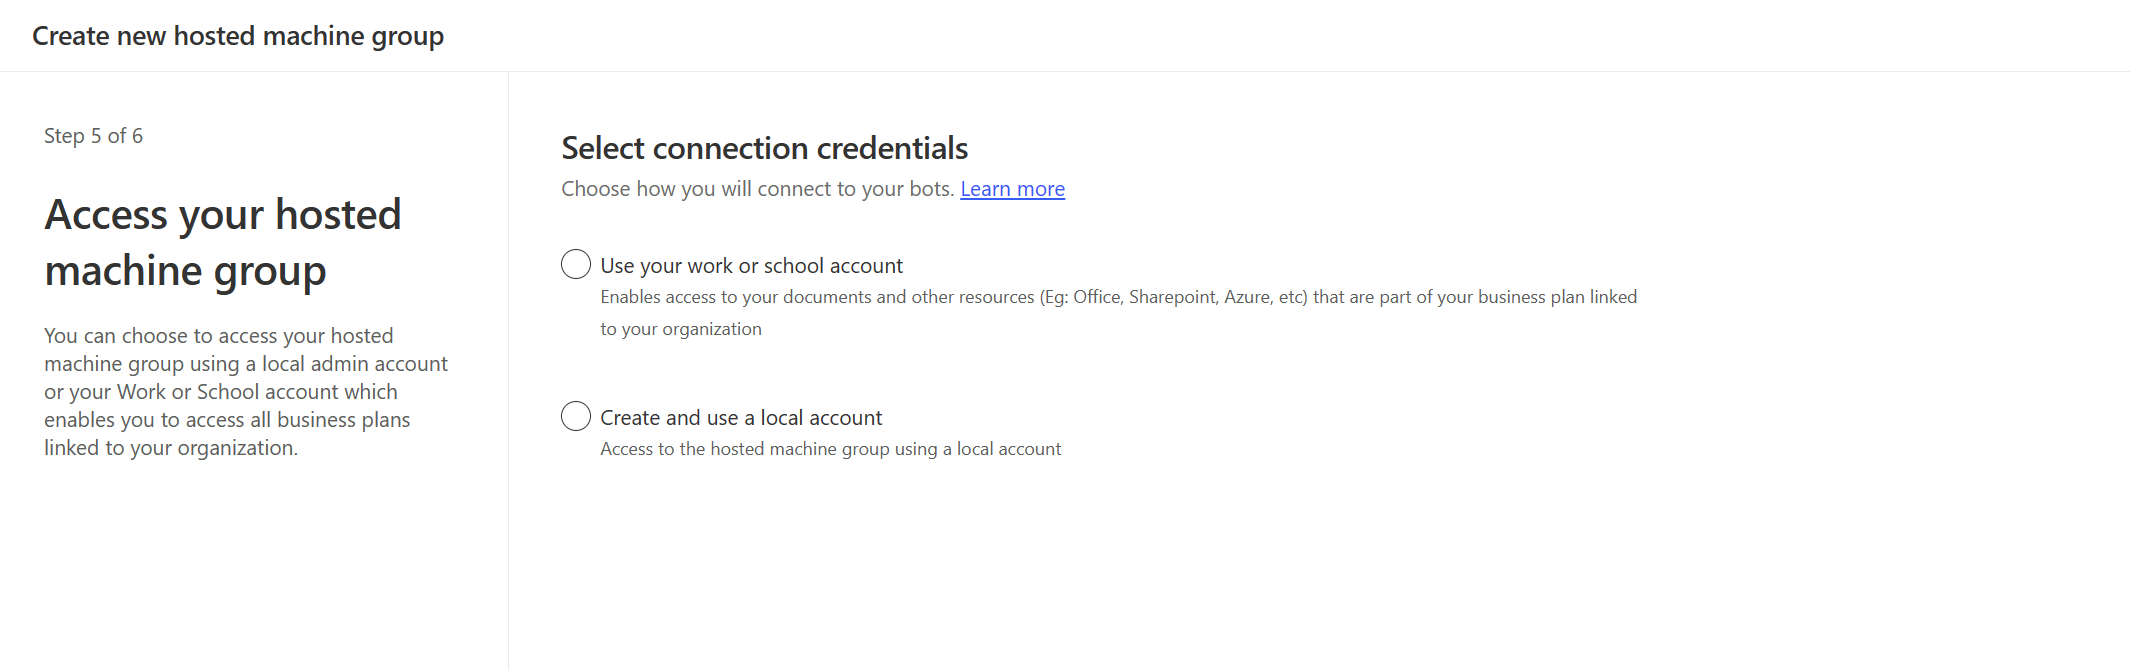 Screenshot of the Use your work or school account option in the hosted machine group creation wizard.